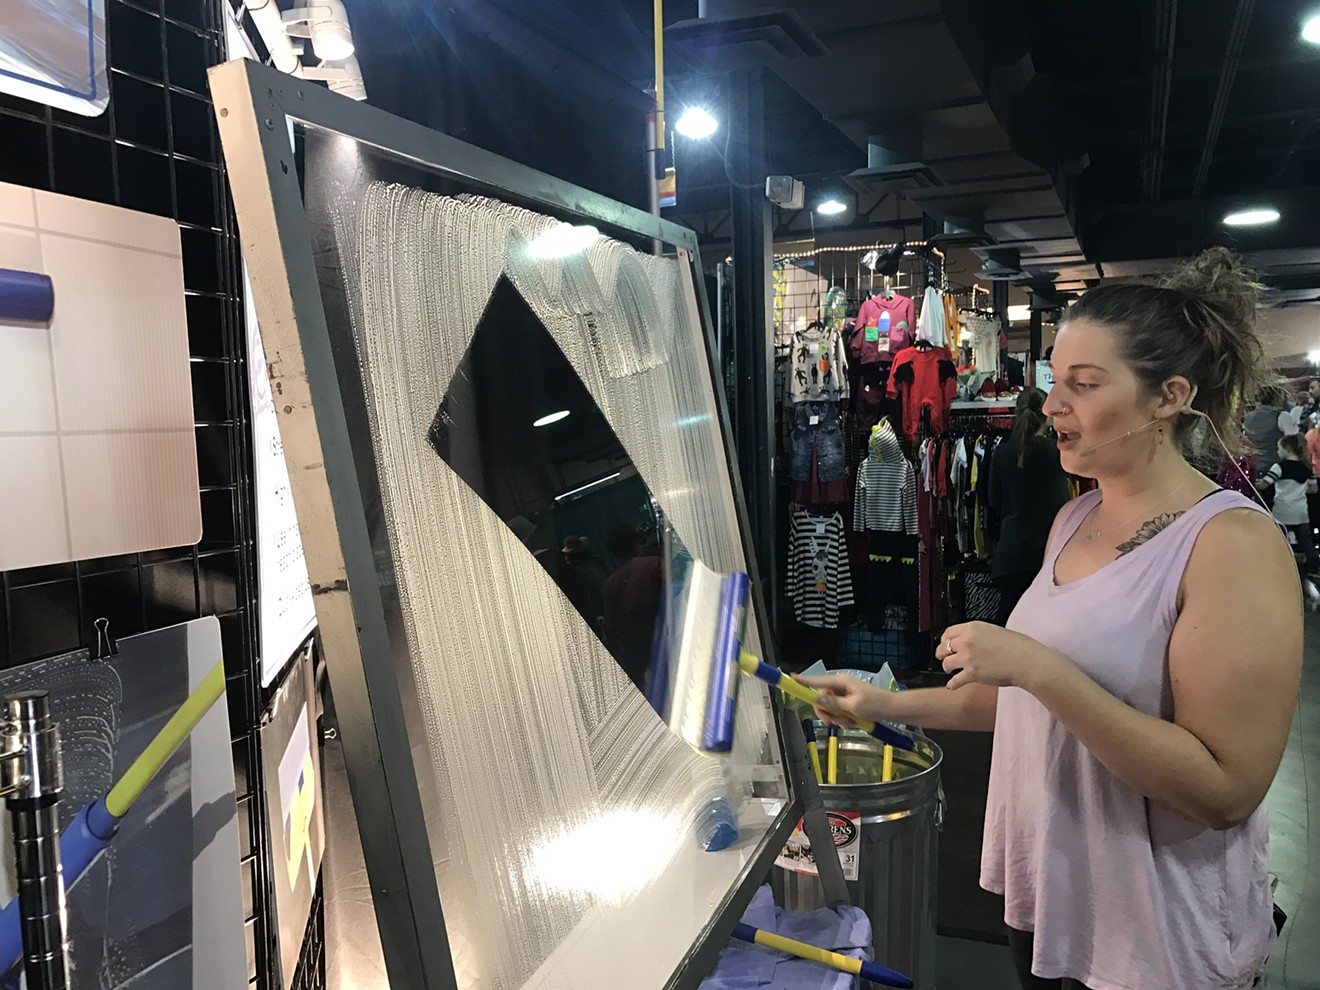 Alicia O’Connell stands in the male-dominated state fair showroom with her display of the Aquablade, a glorified squeegee whose makes says lasts for 10 years, leaving behind zero residue on windows for easy cleanup.